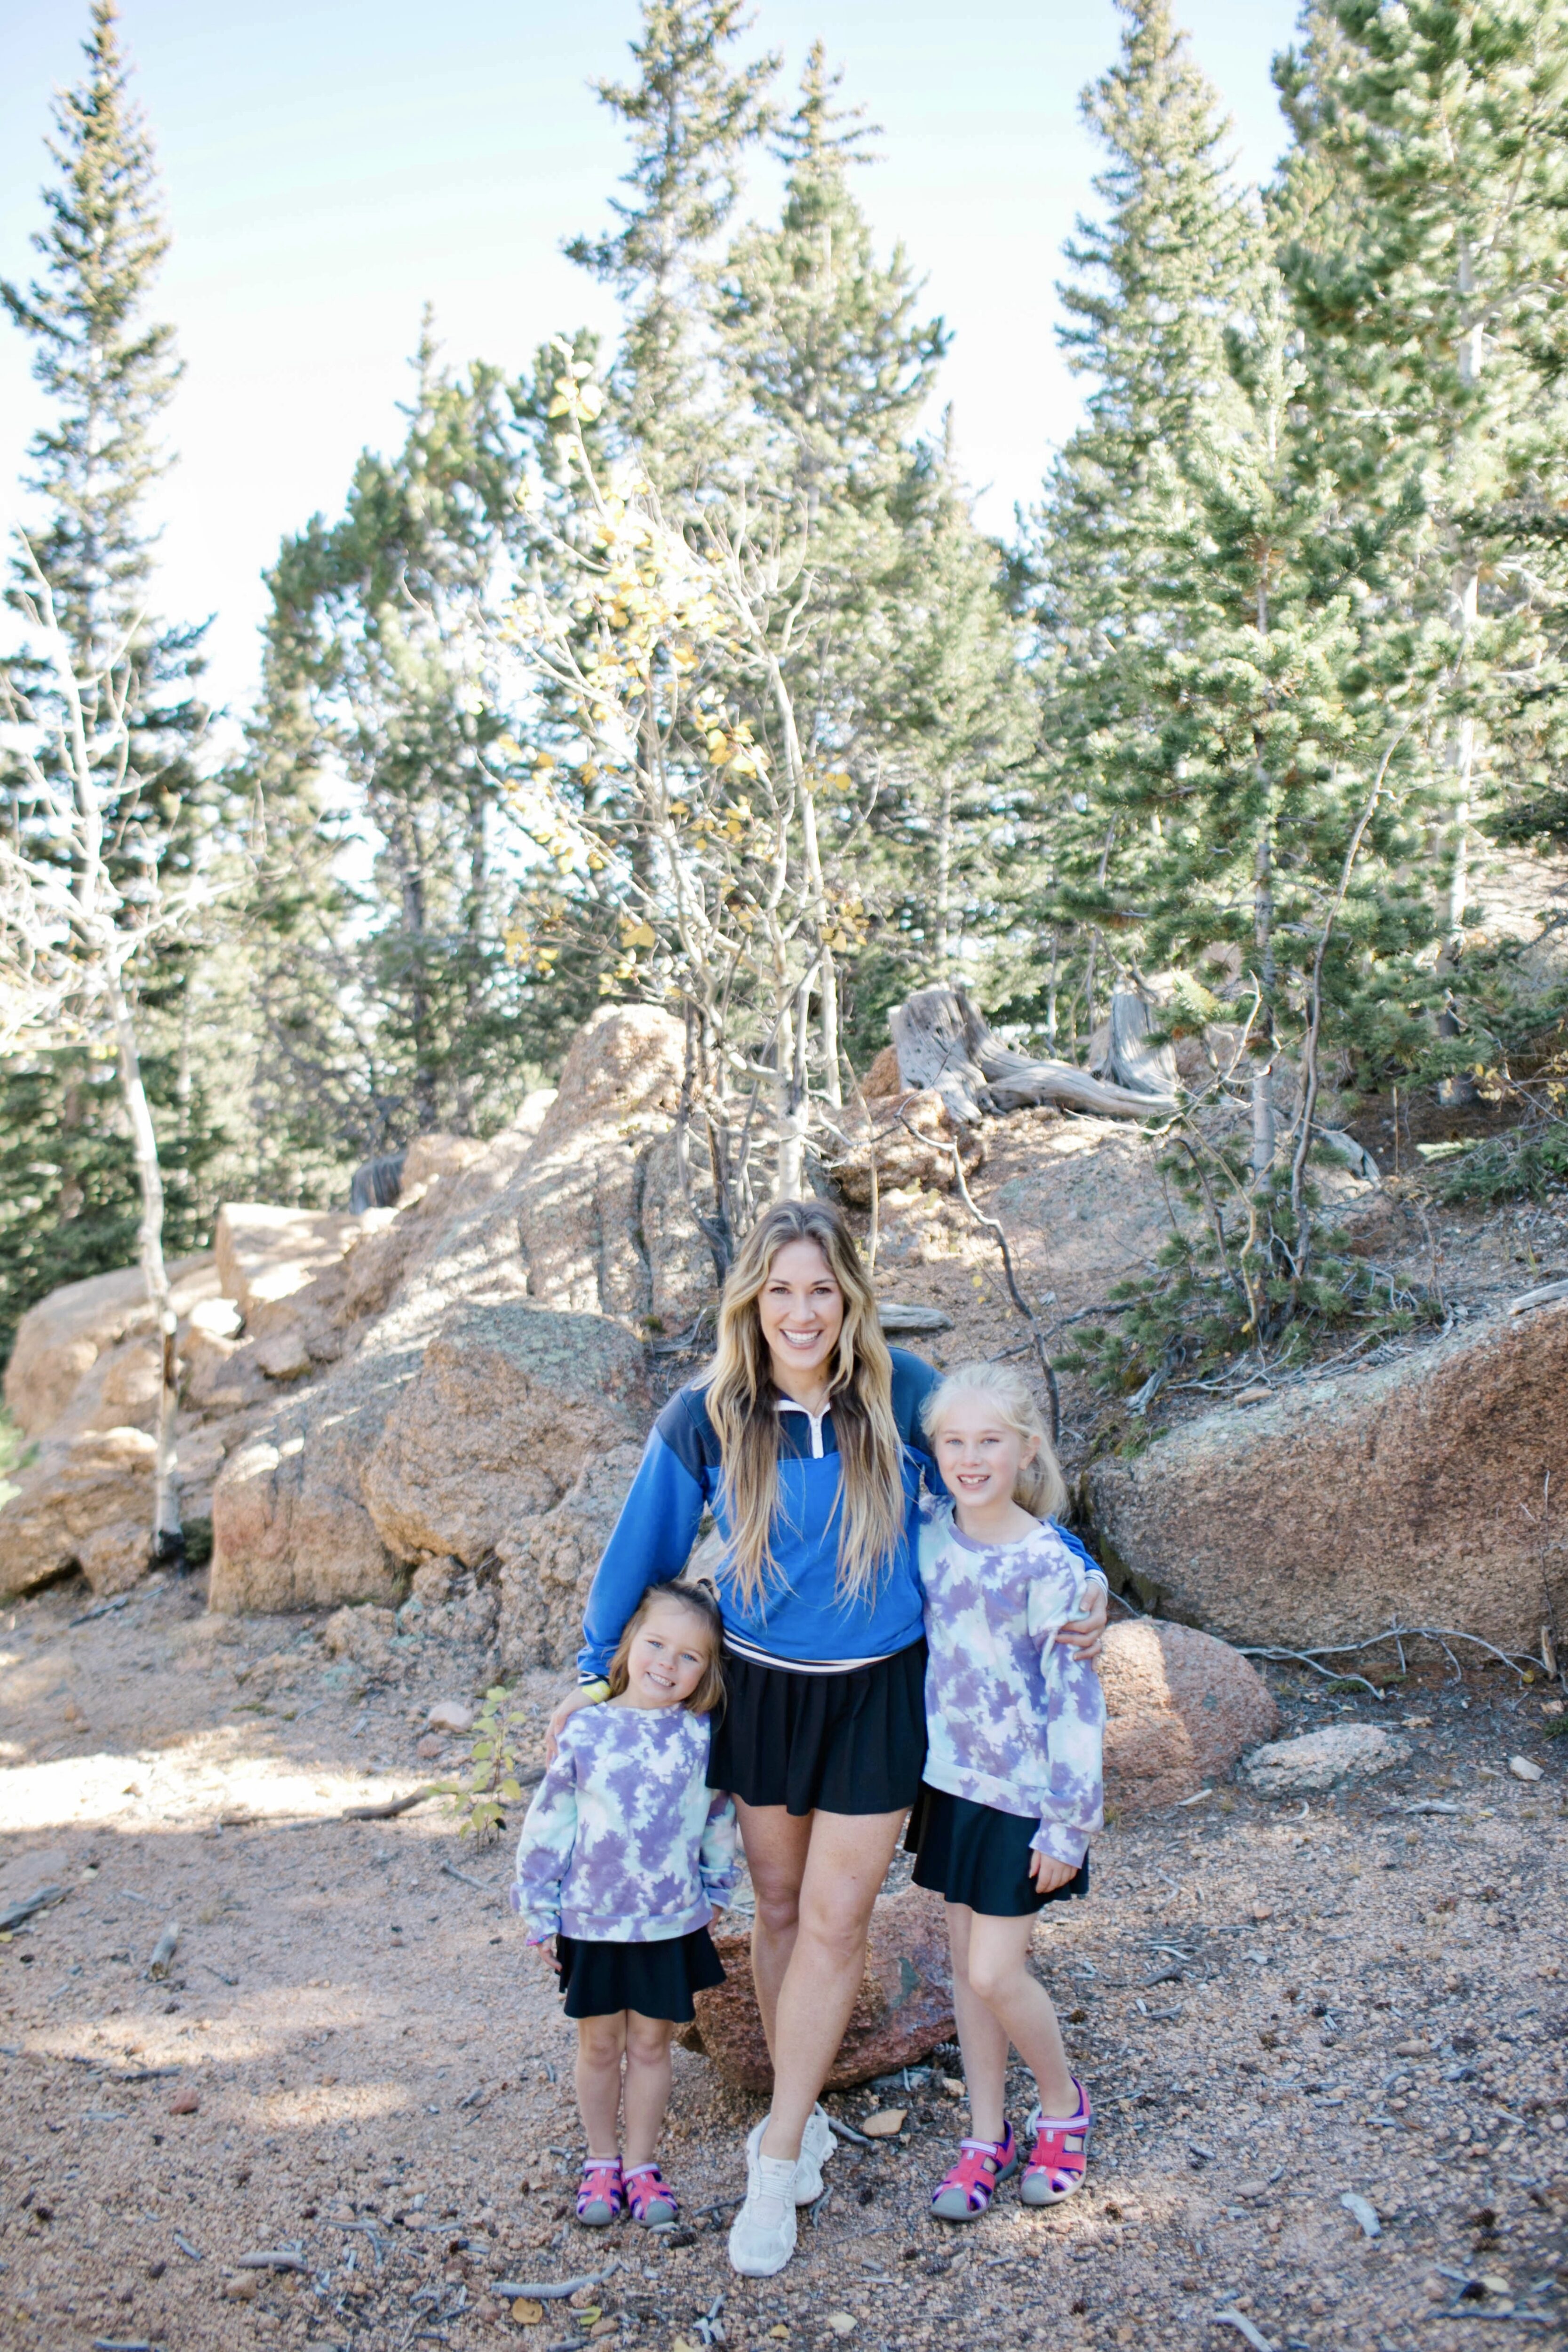 things to do in colorado springs, hiking in colorado springs, traveling with kids, traveling with family